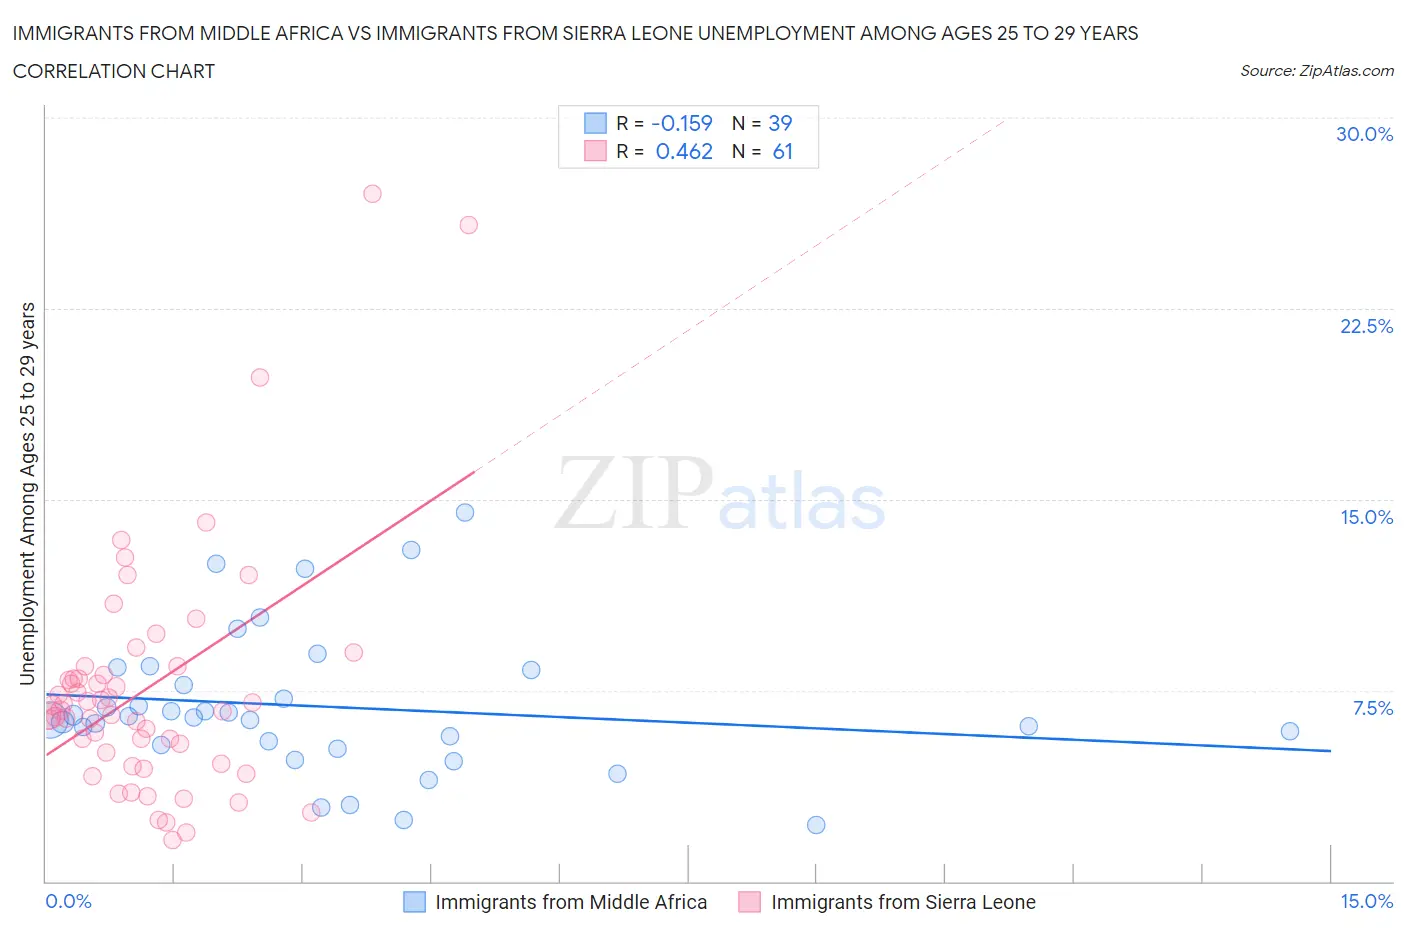 Immigrants from Middle Africa vs Immigrants from Sierra Leone Unemployment Among Ages 25 to 29 years